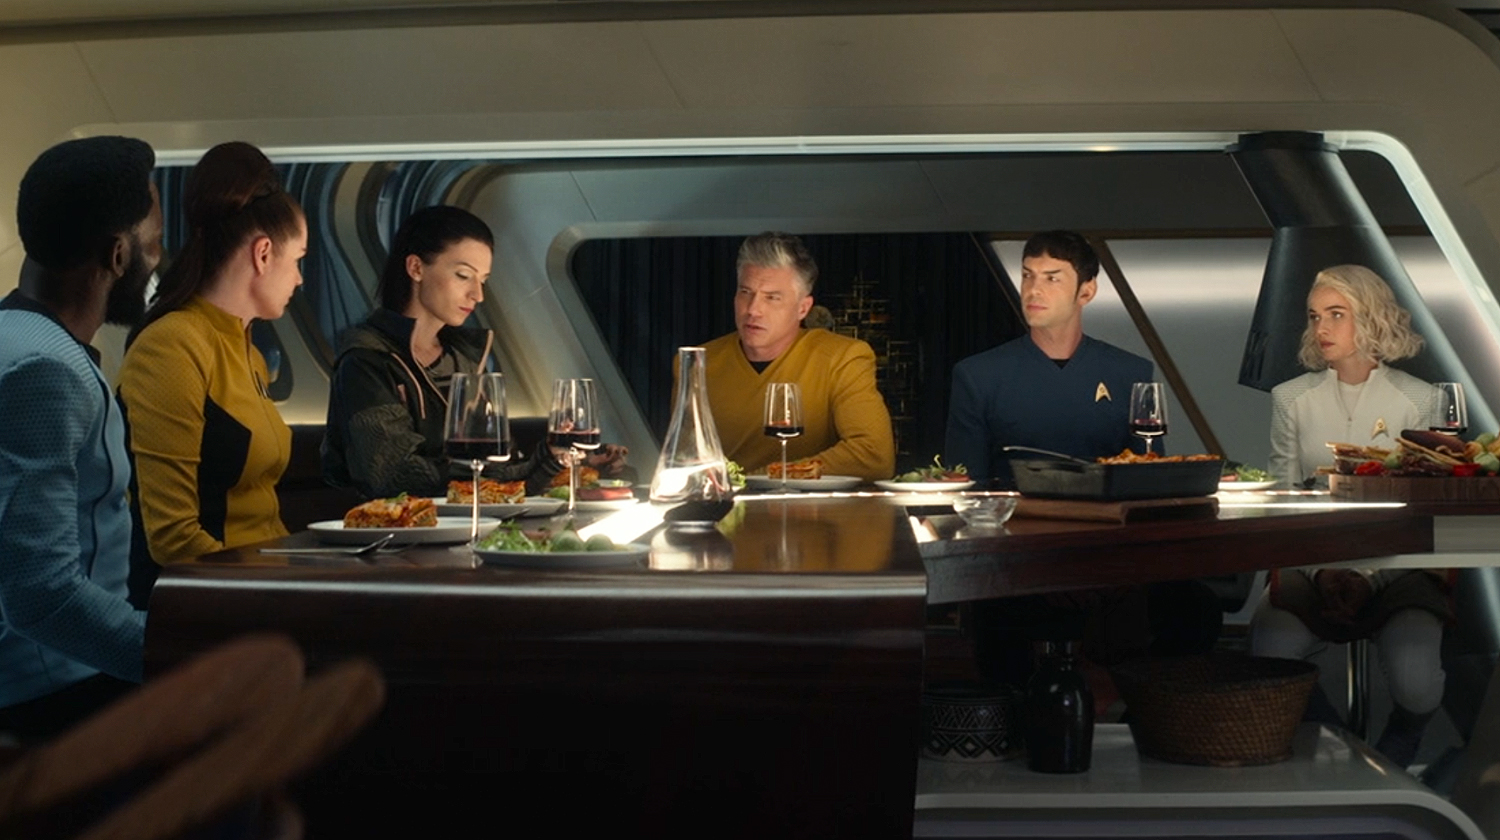 The starship Enterprise crew sits around the captain's table in episode 7 of Strange New Worlds.